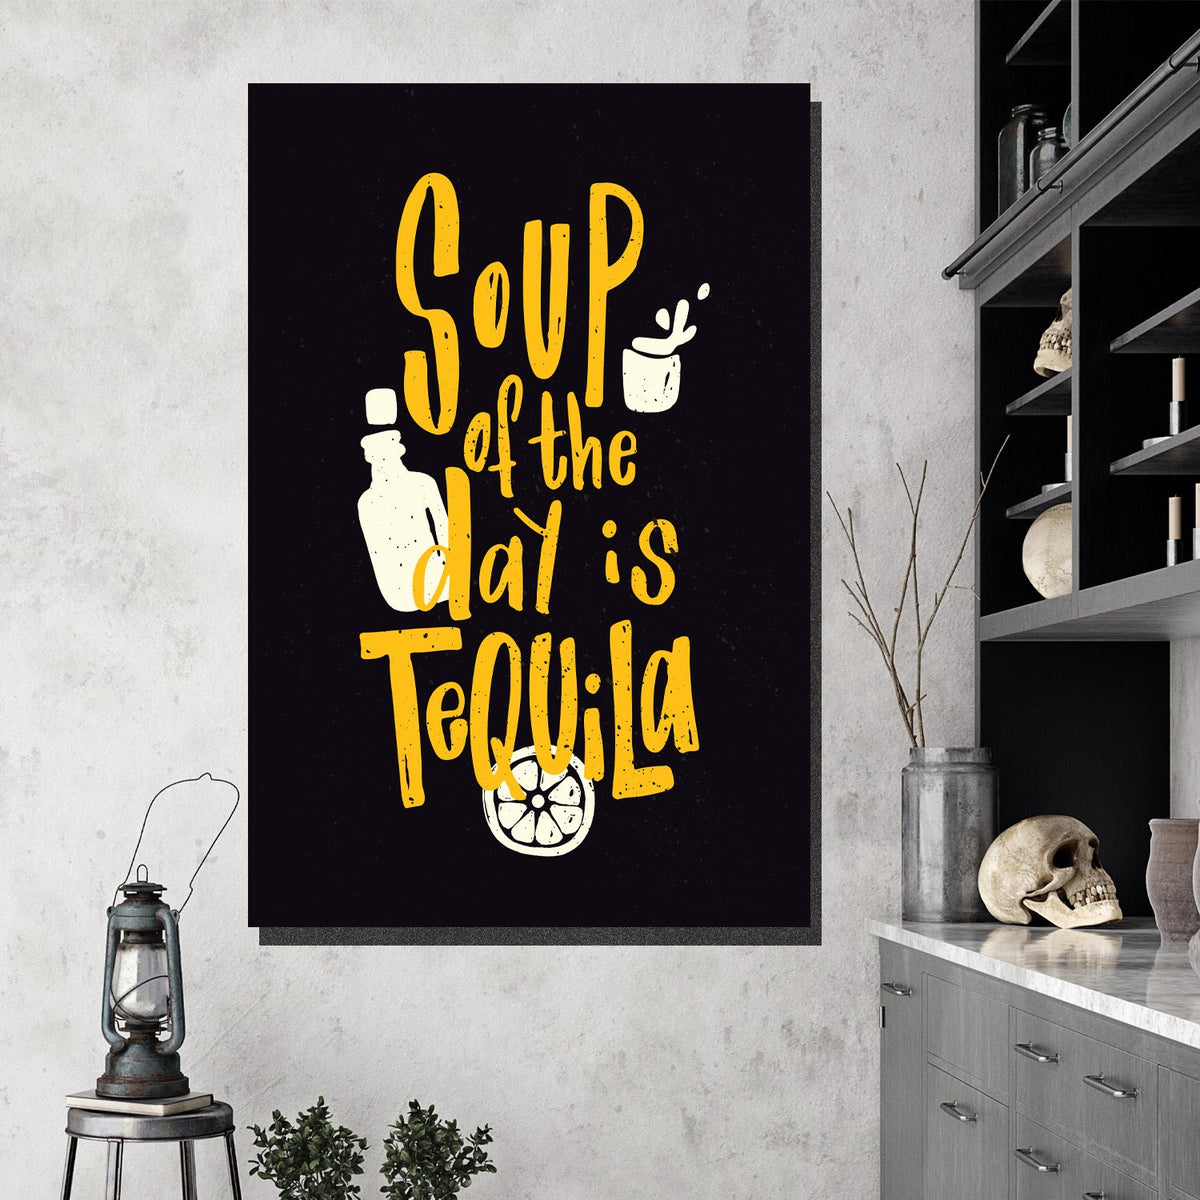 https://cdn.shopify.com/s/files/1/0387/9986/8044/products/SoupoftheDayCanvasArtprintStretched-1.jpg